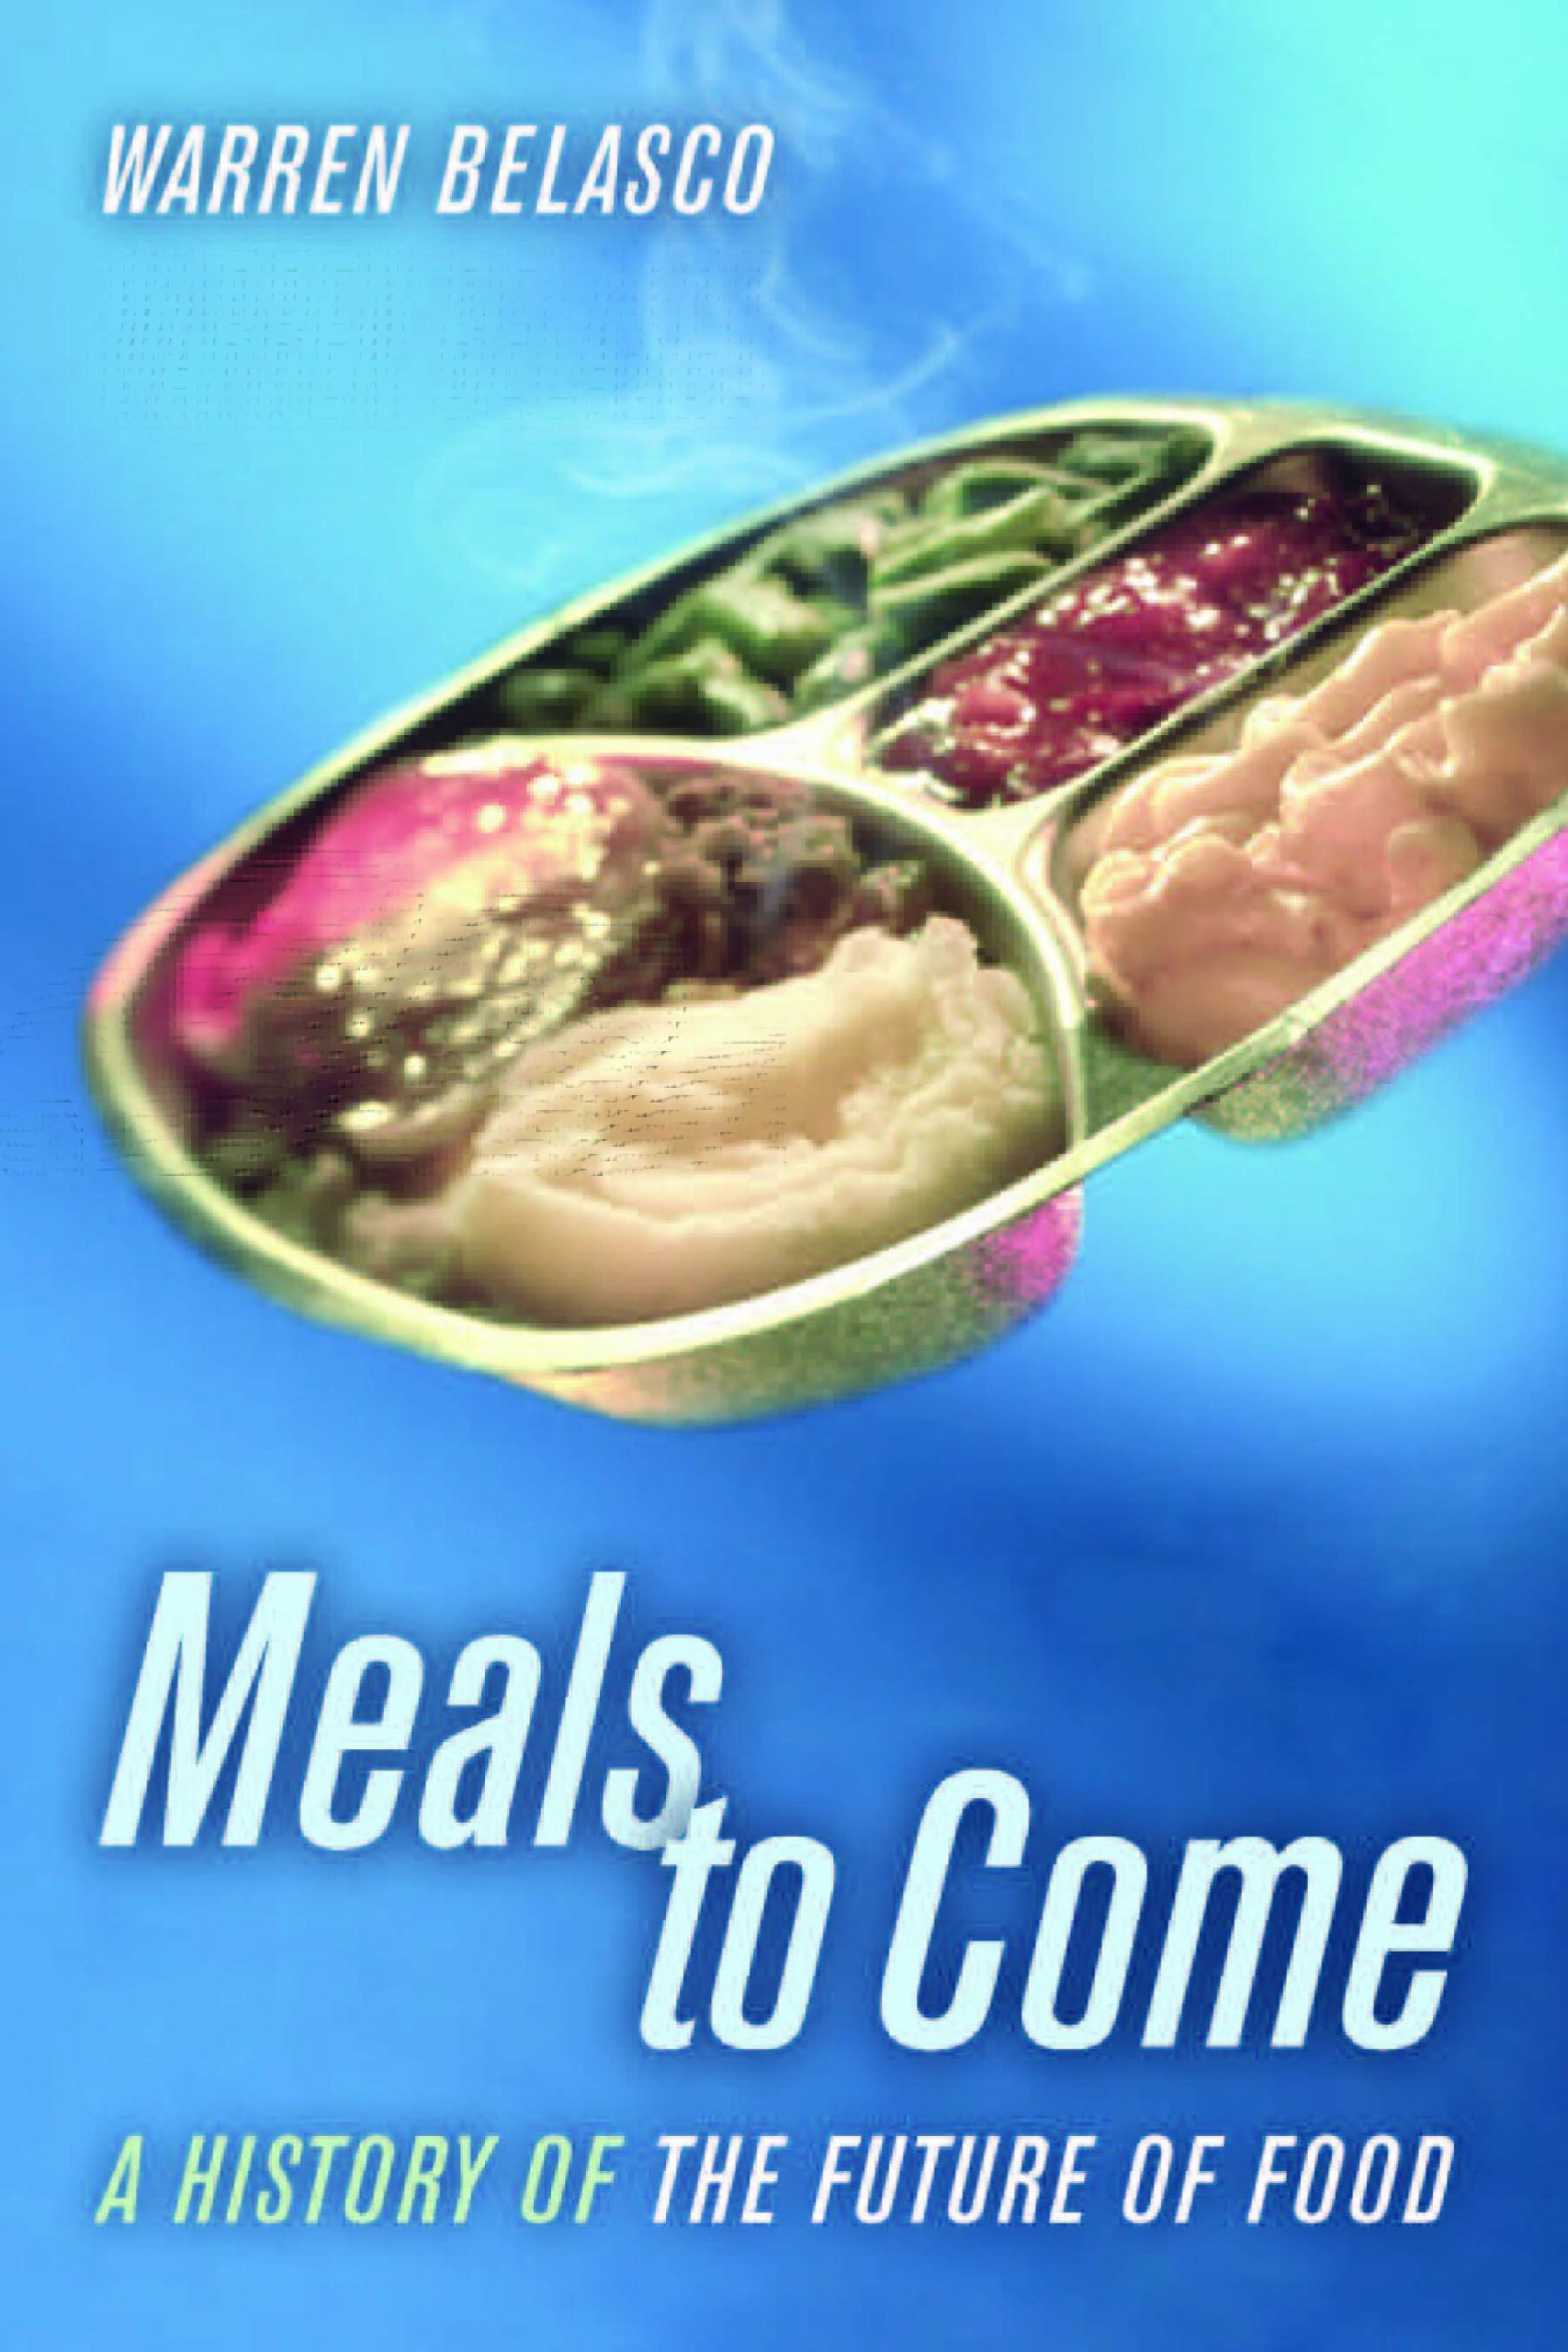 Meals to come book cover with tv dinner